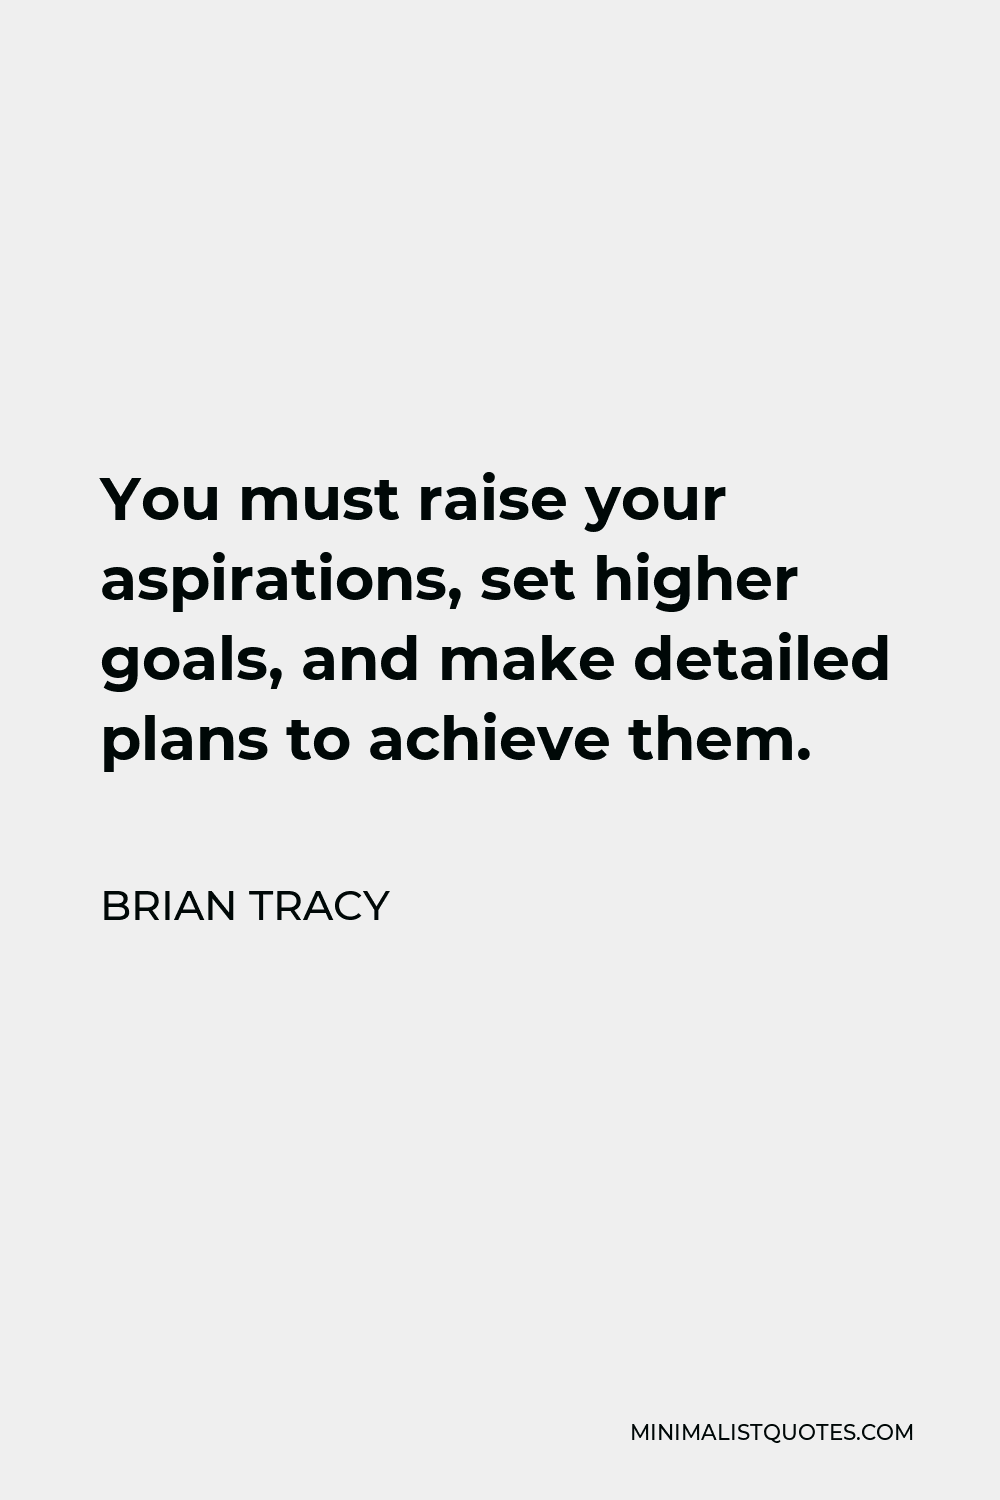 Brian Tracy Quote - You must raise your aspirations, set higher goals, and make detailed plans to achieve them.